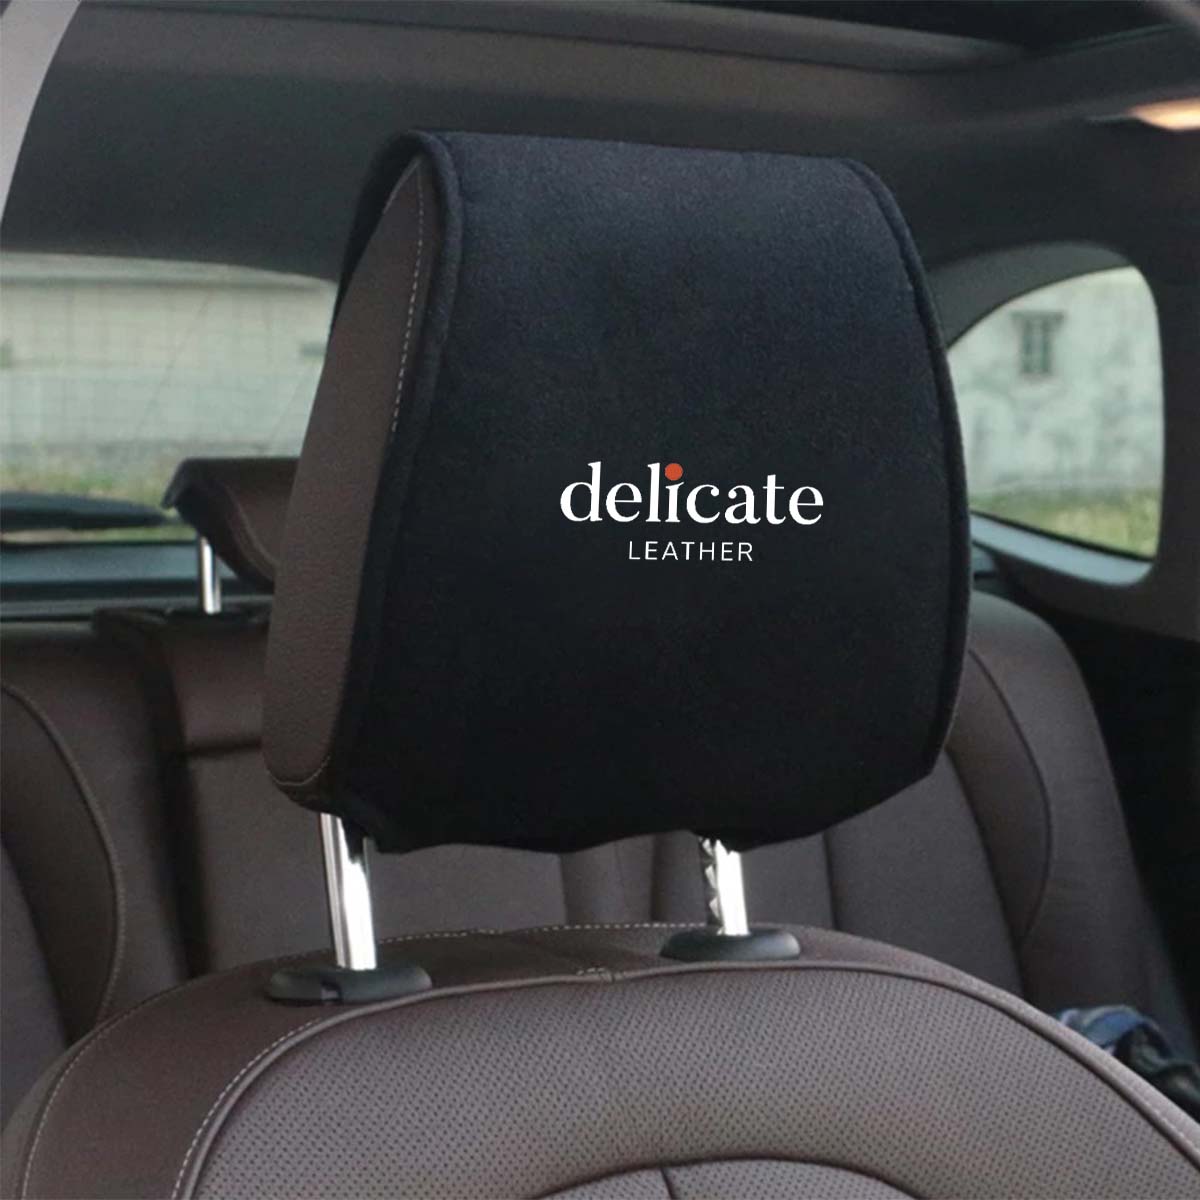 Mitsubishi Car Seat Headrest Cover: Stylish Protection for Your Vehicle's Headrests